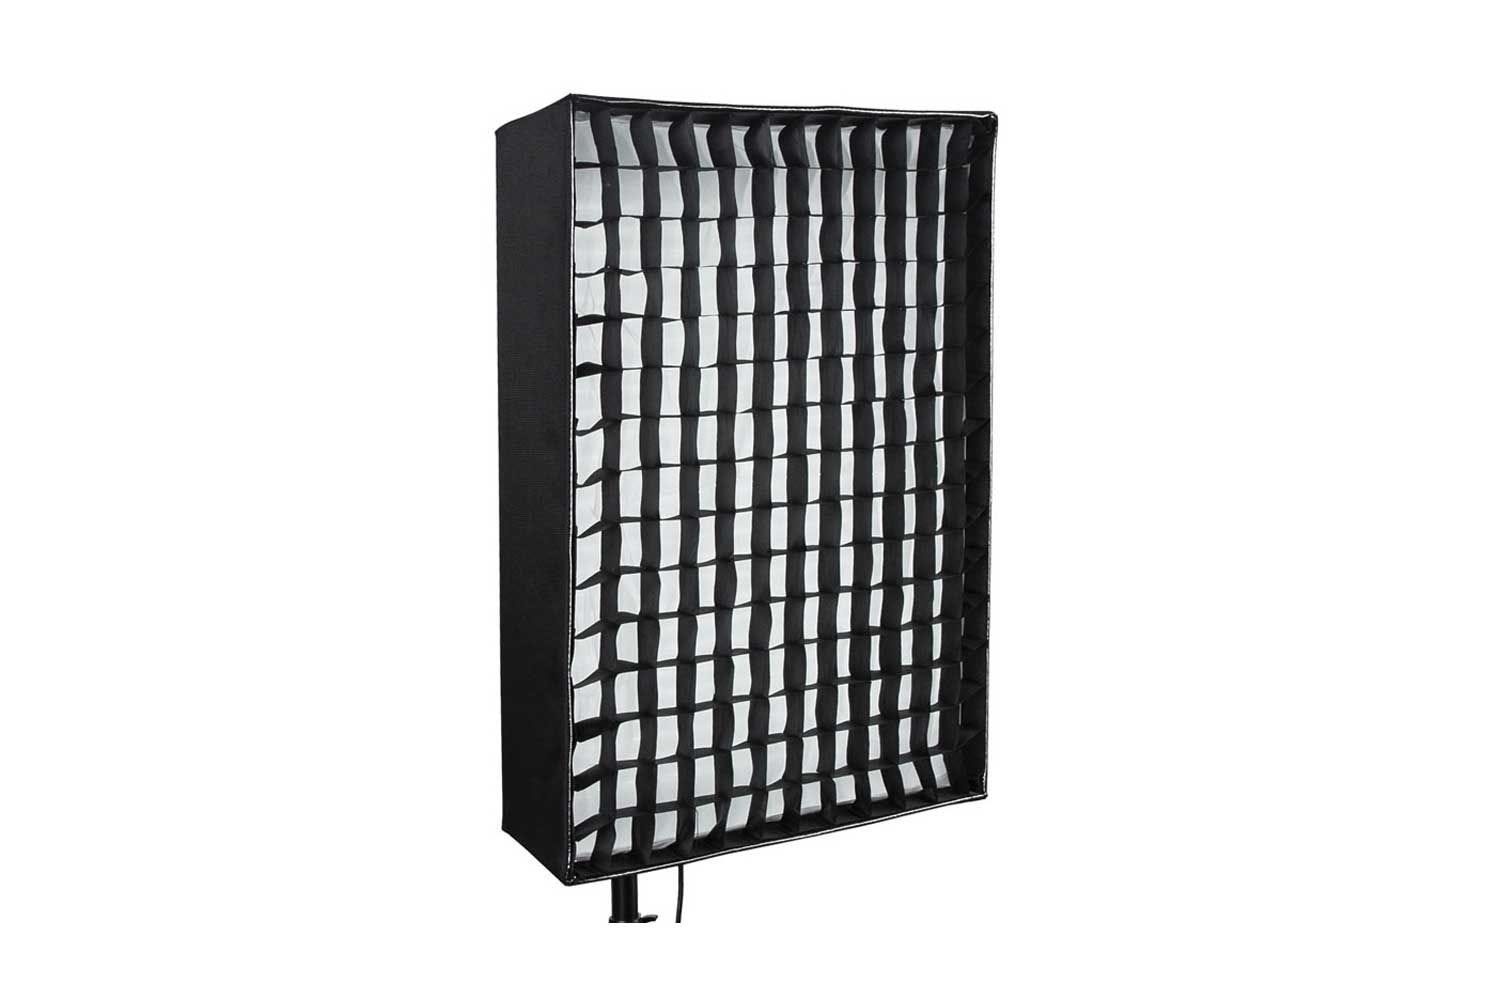 SWIT LA-BS100 Softbox with Eggcrate for SL-100P